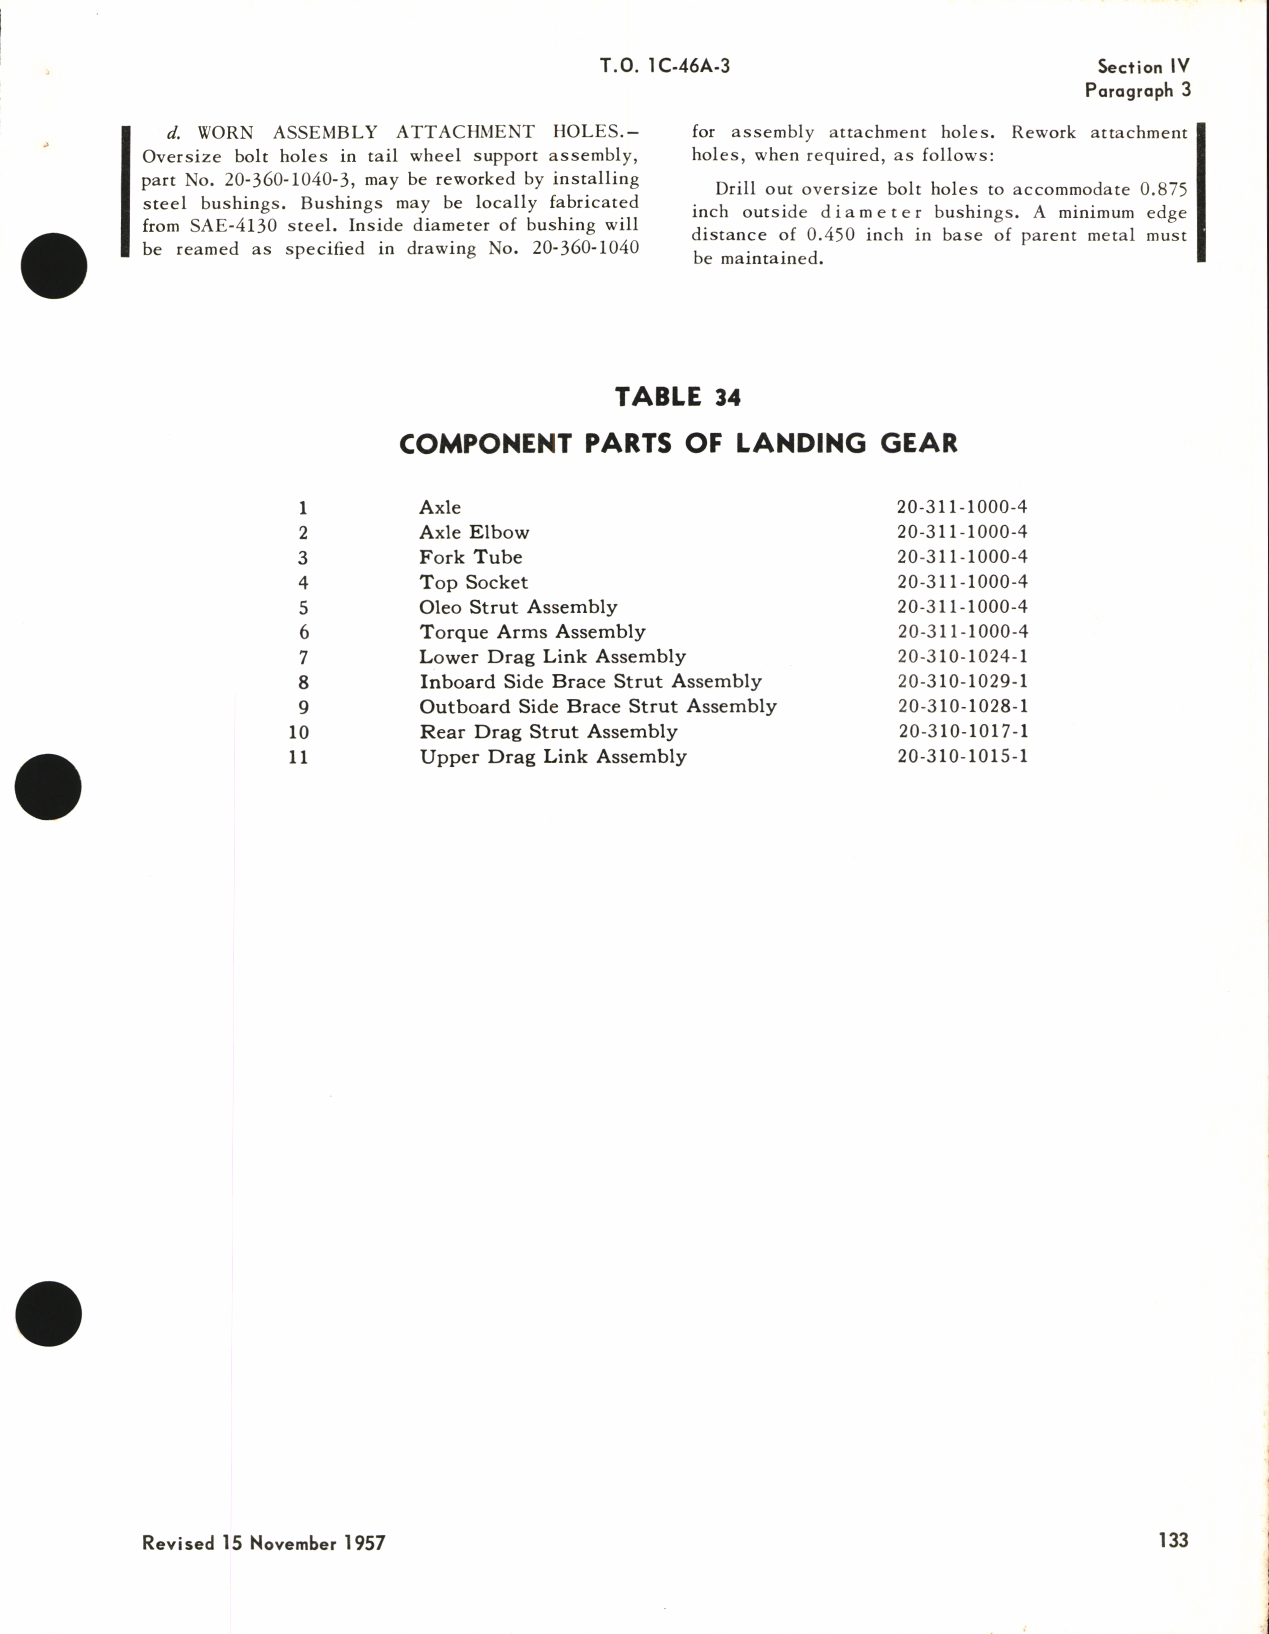 Sample page 7 from AirCorps Library document: Structural Repair Instructions for C-46, ZC-46A, C-46D, and C-46F